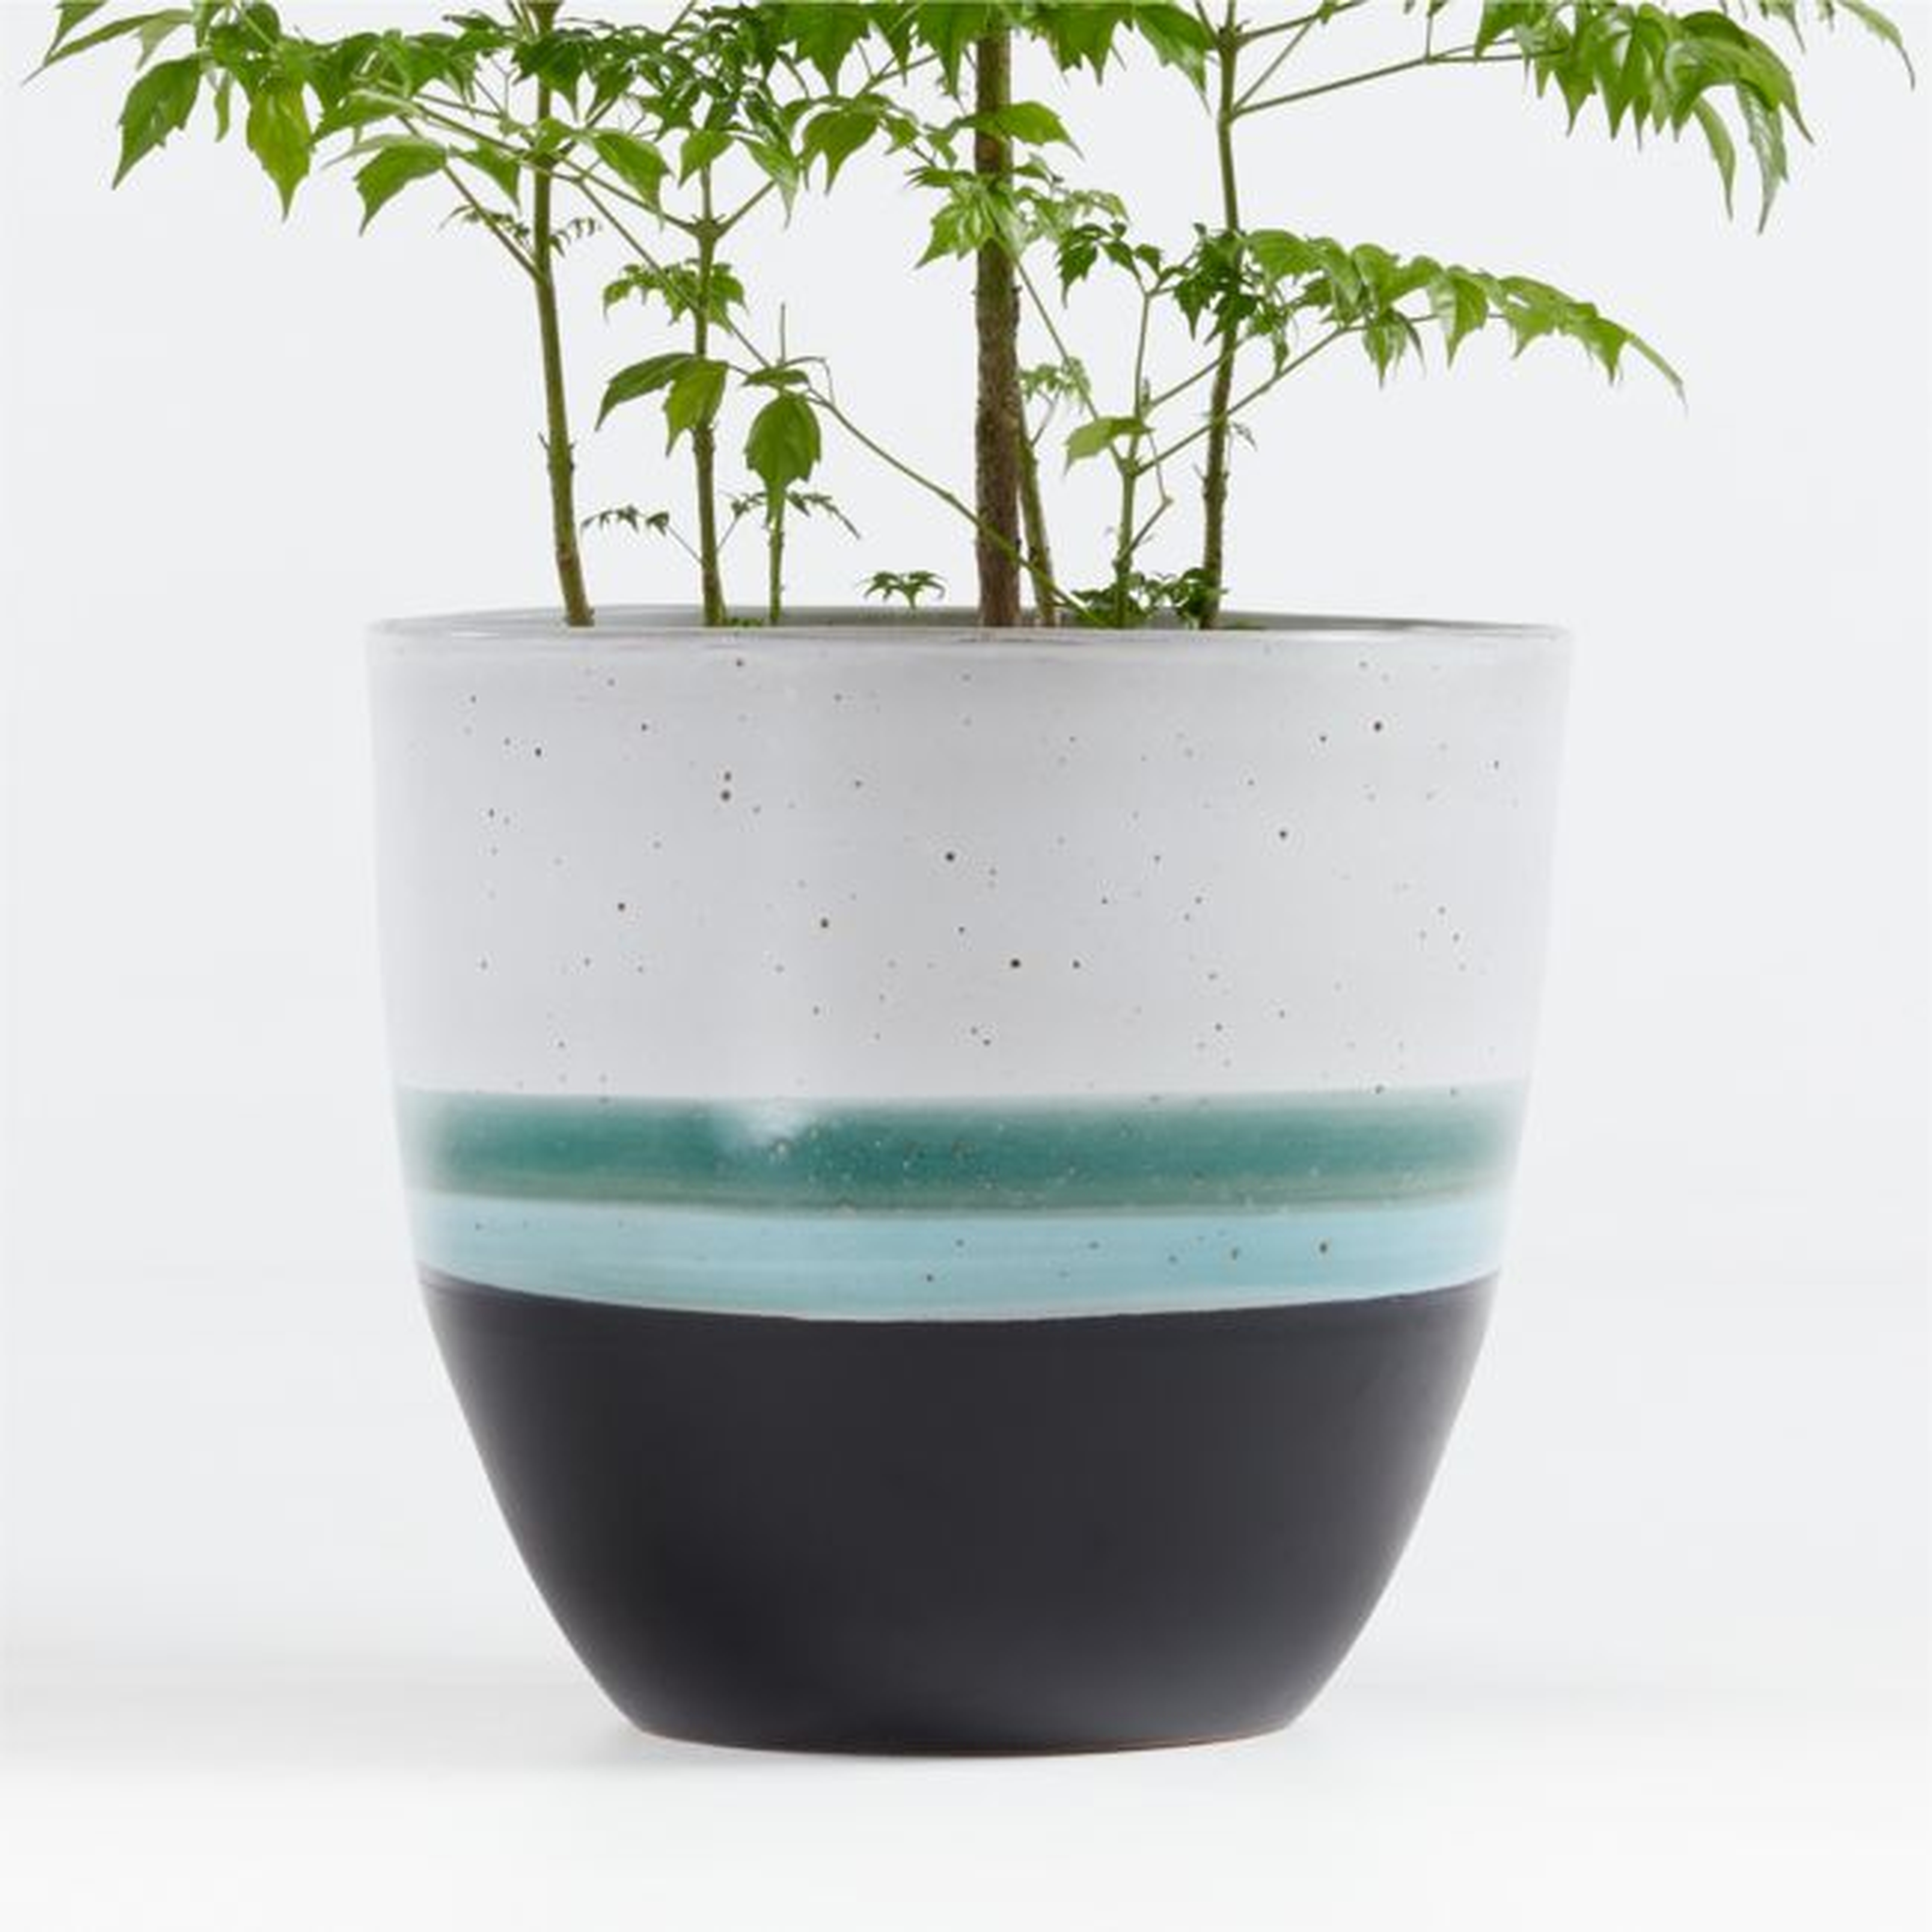 Aveiro Large Blue Planter - Crate and Barrel